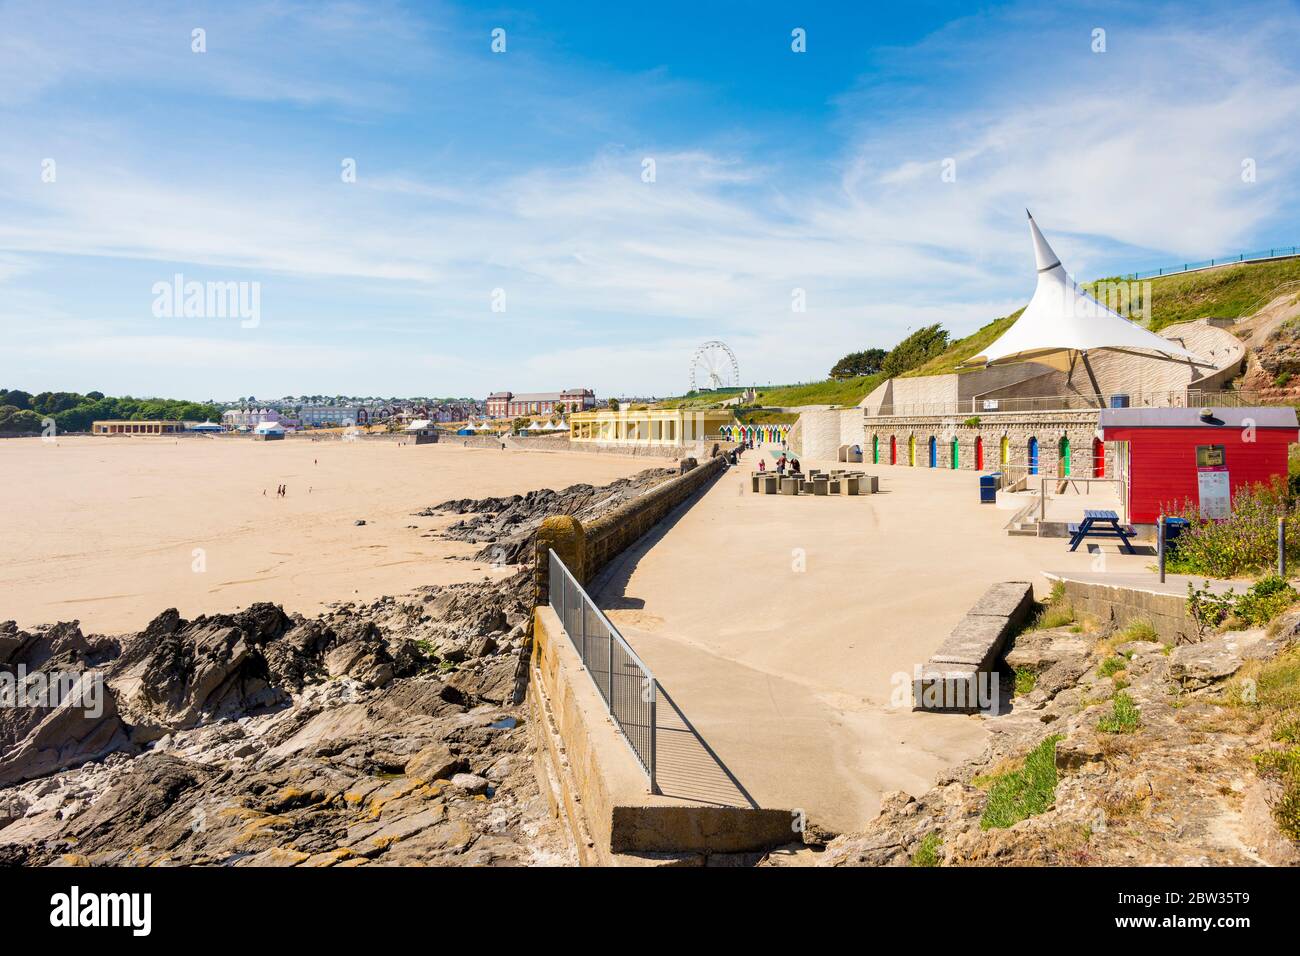 The promenade and sandy beach at Barry Island are very quiet on a sunny Spring bank holiday afternoon during the 2020 coronavirus crises. Stock Photo